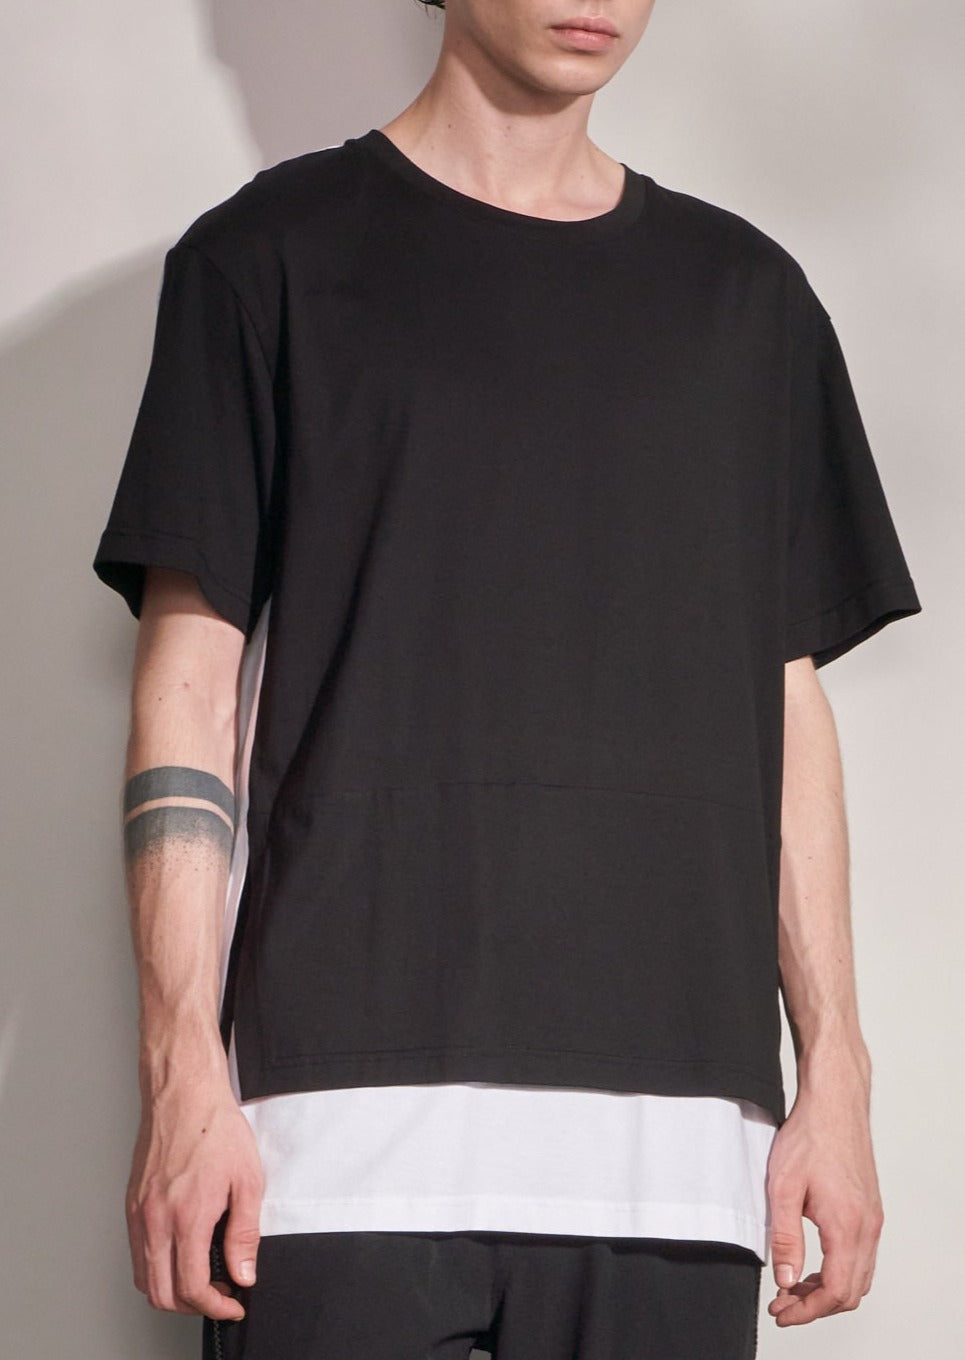 Fake Layer Tee With Color Contrast – HARRISON WONG